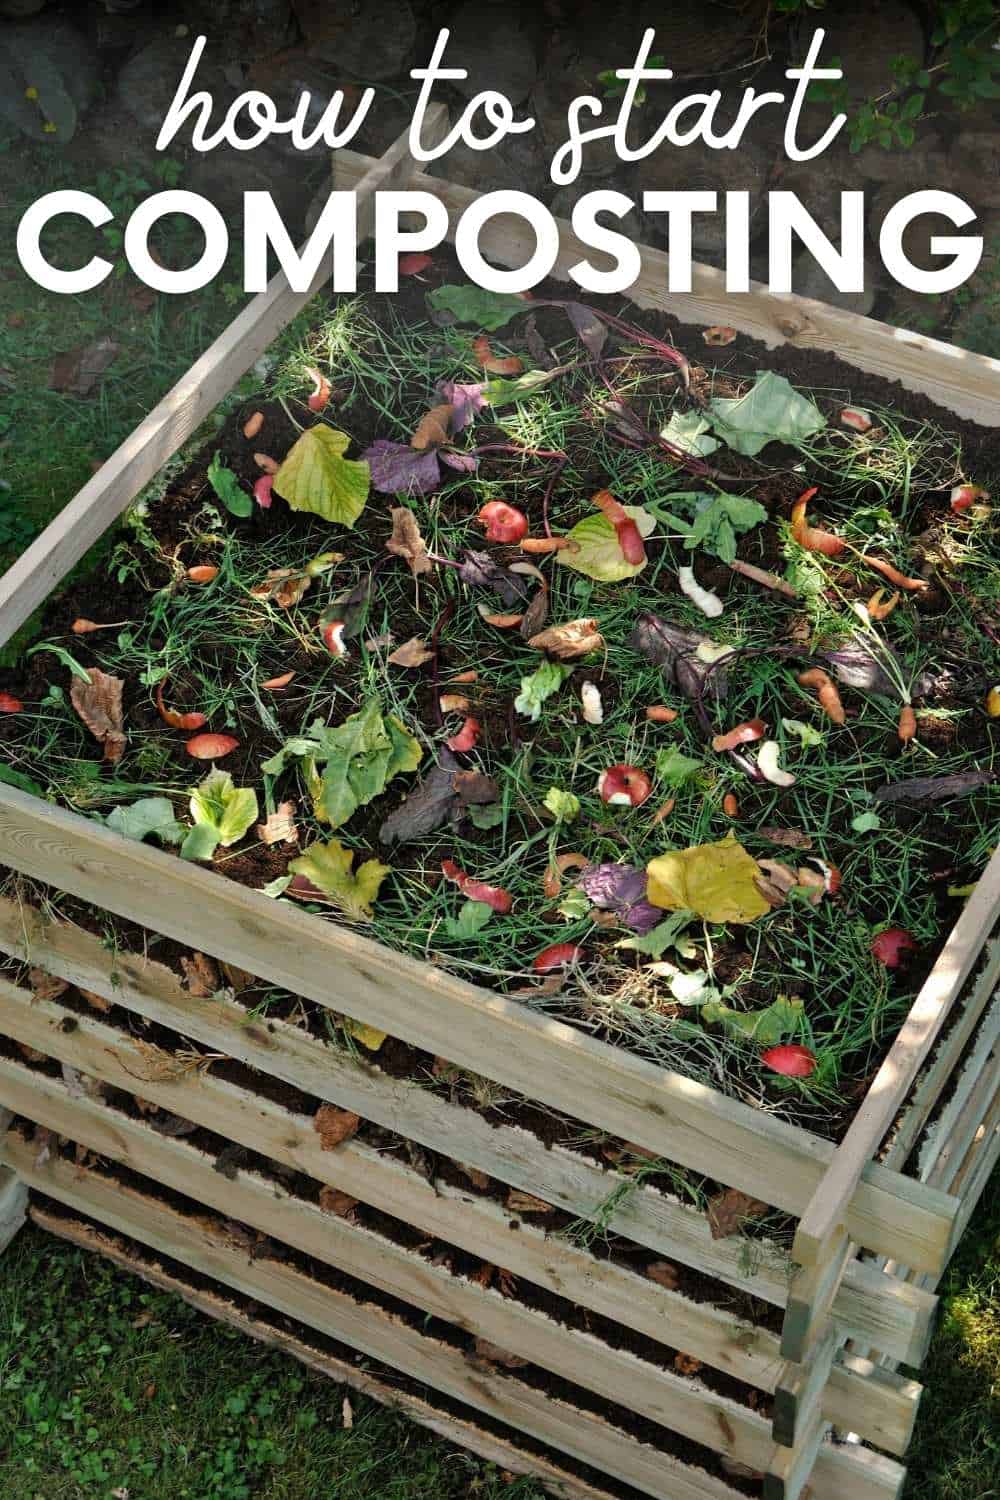 How To Compost Dryer Lint - Is Dryer Lint Beneficial To Compost